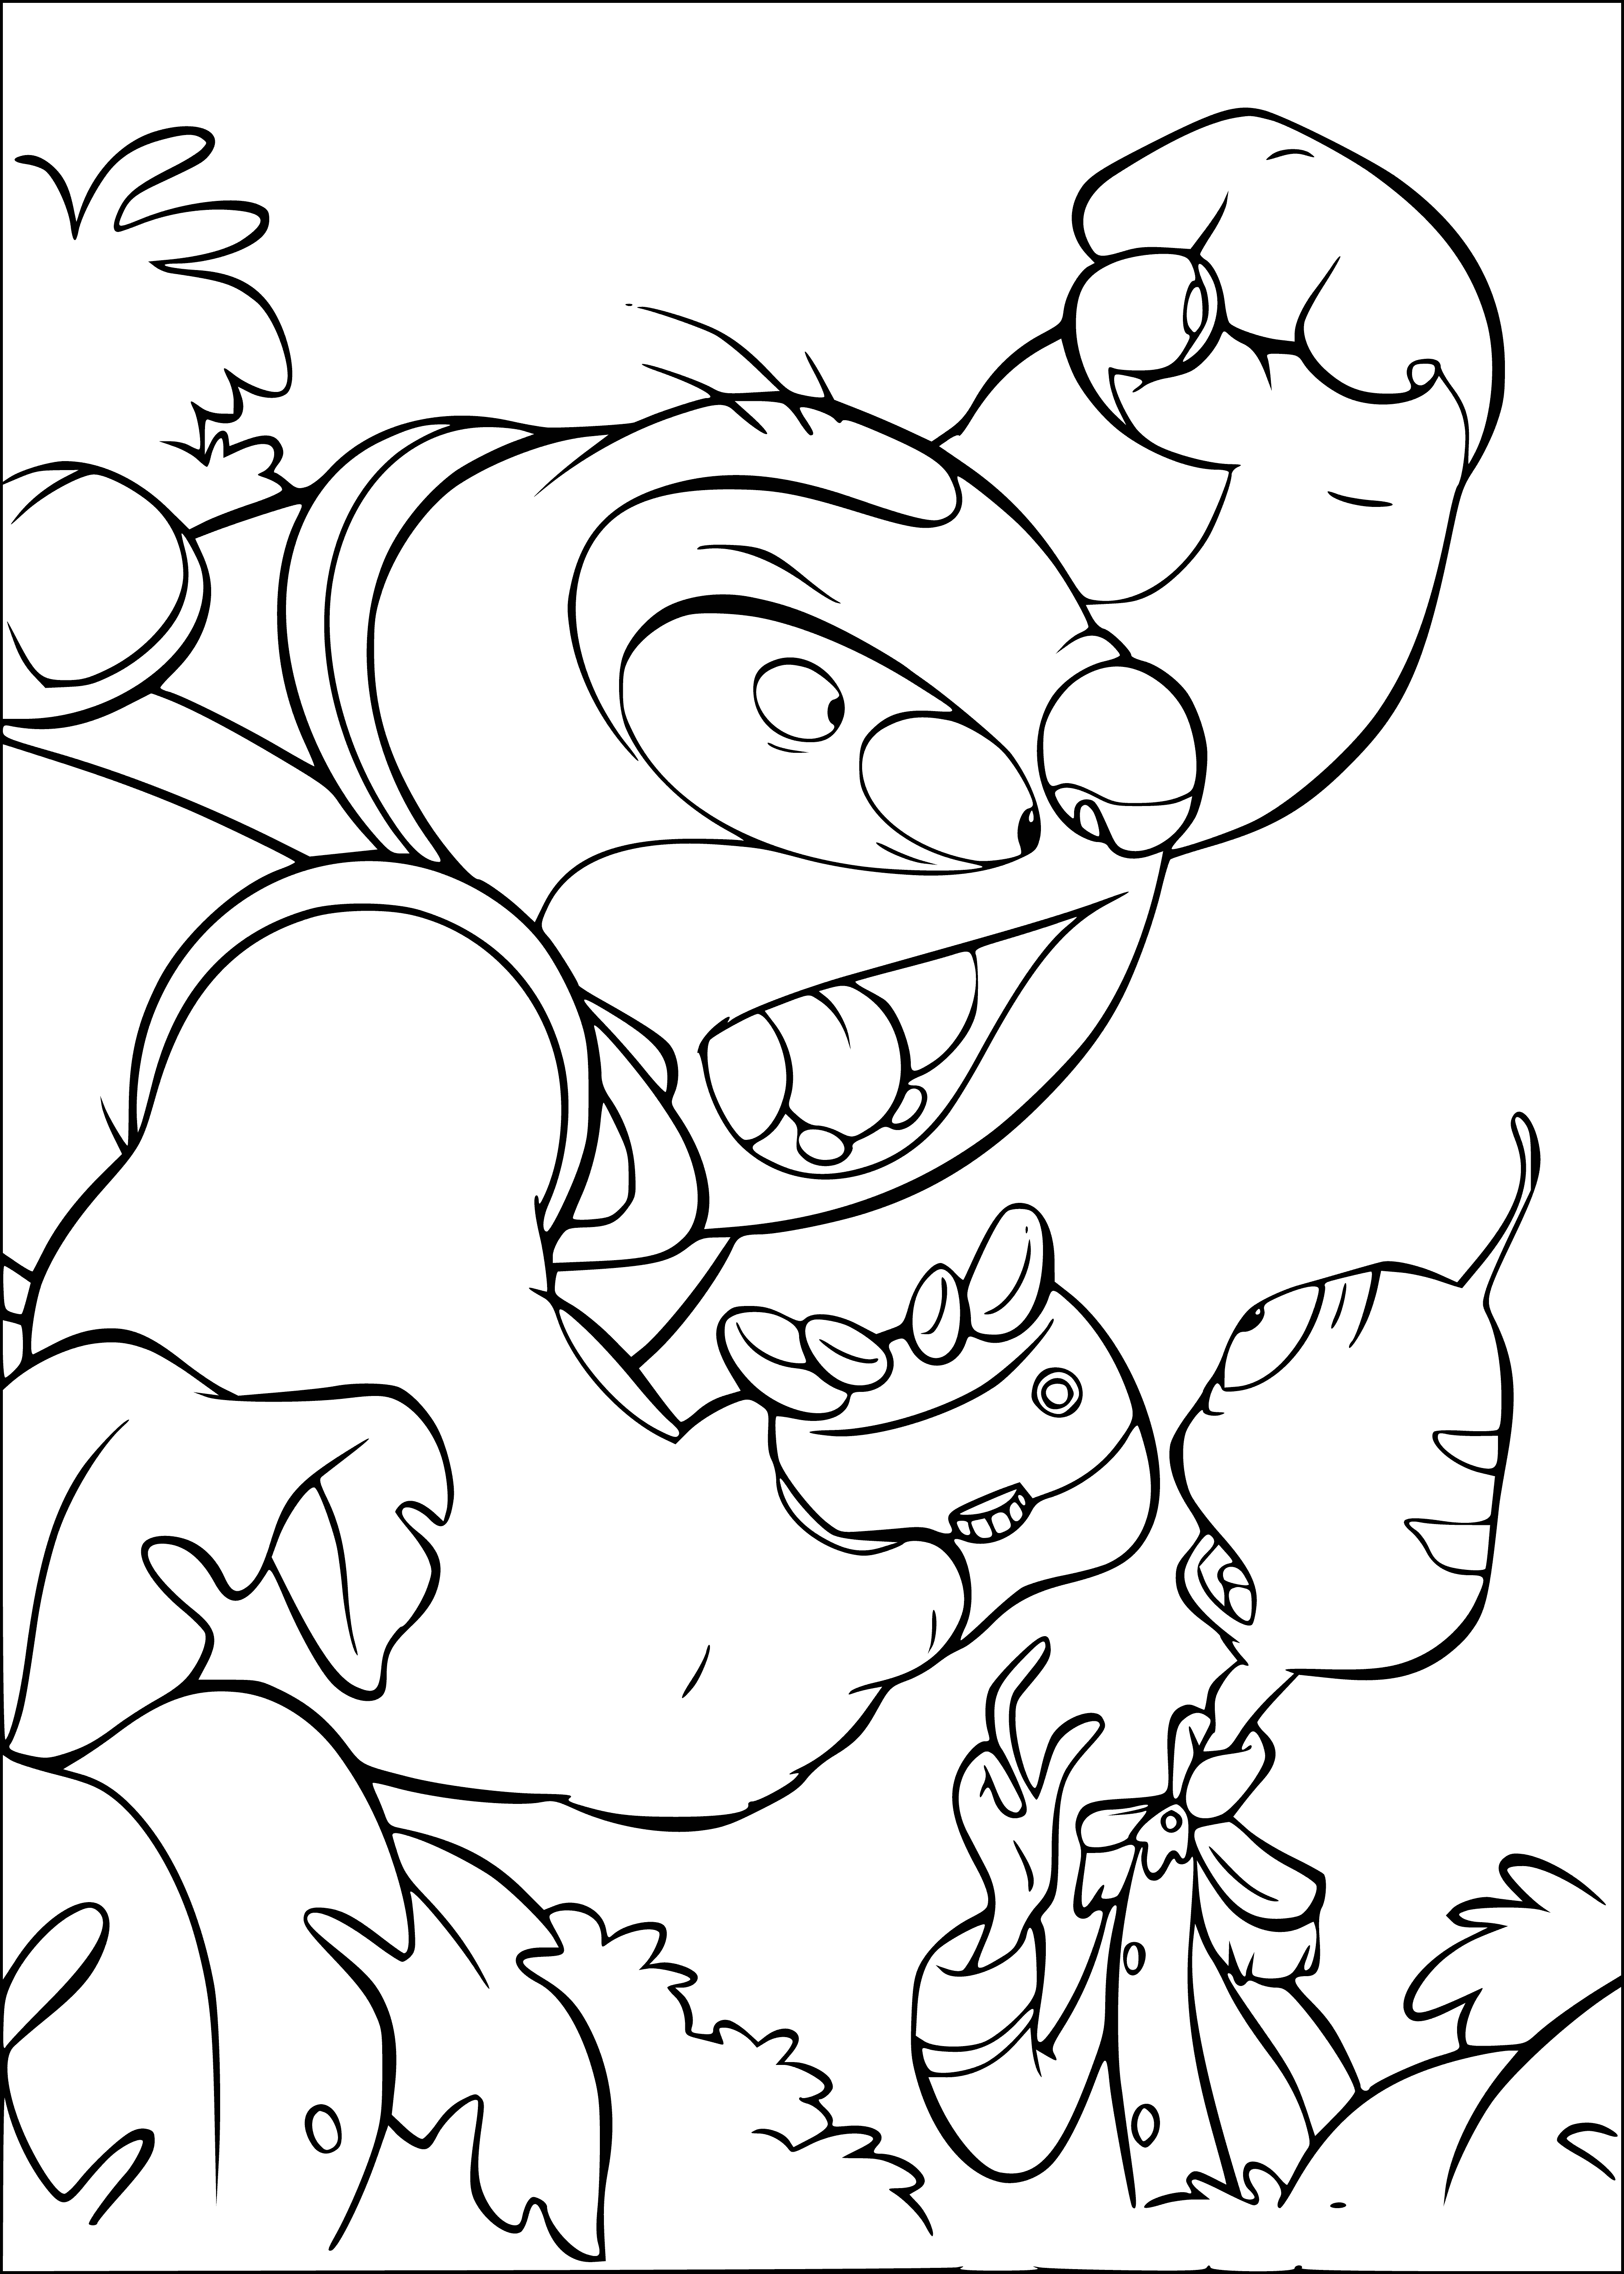 Jamba and Flickley coloring page